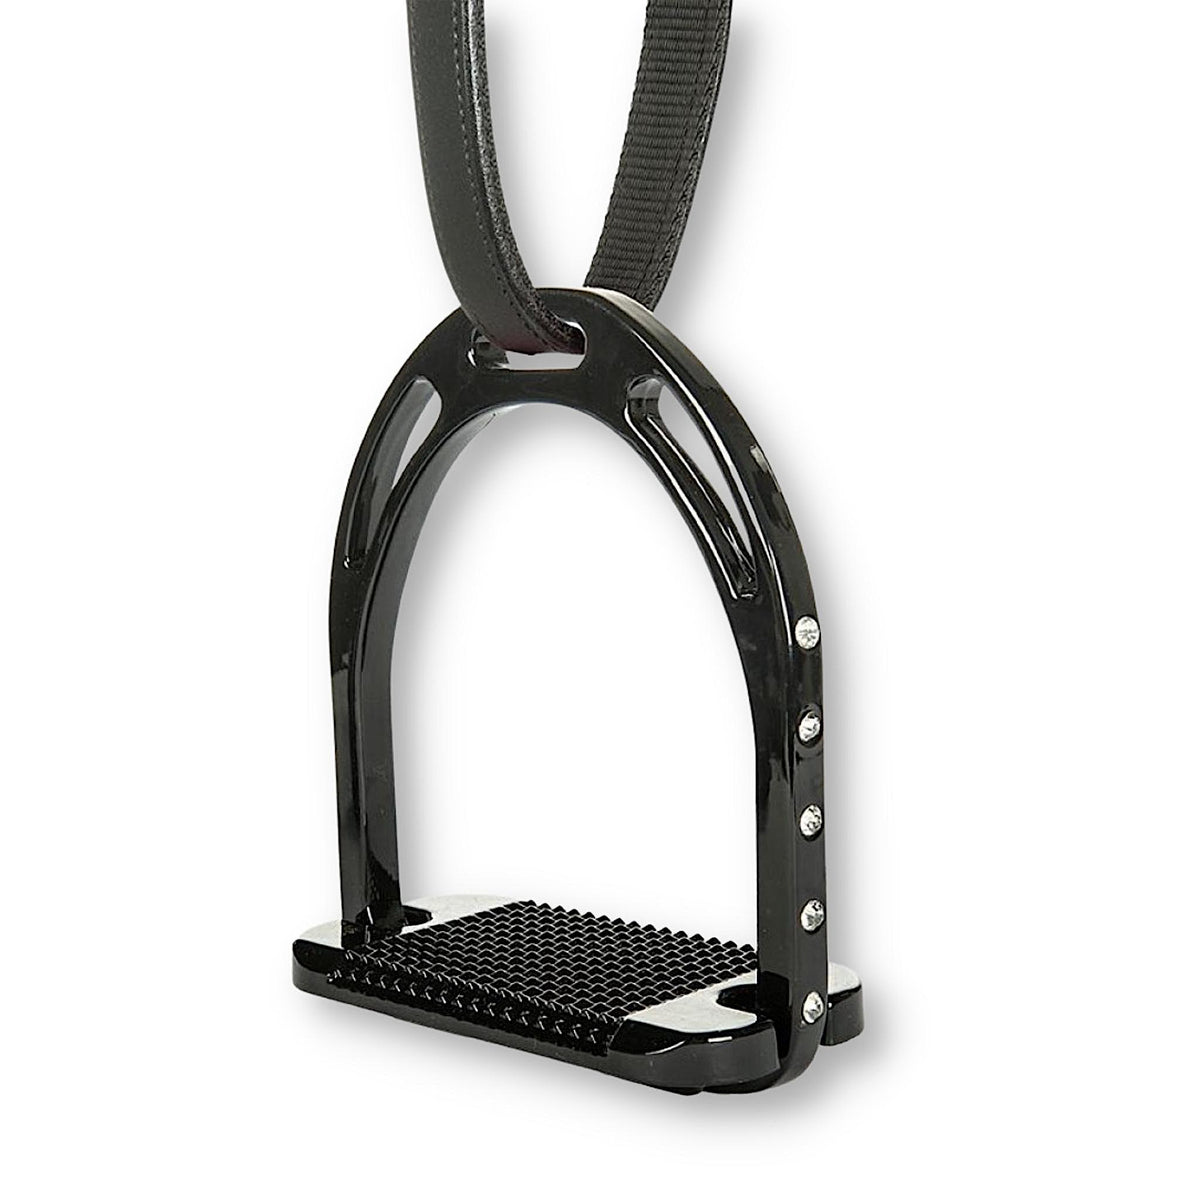 Patent black stirrup with grip tread and clear diamantes on the side.